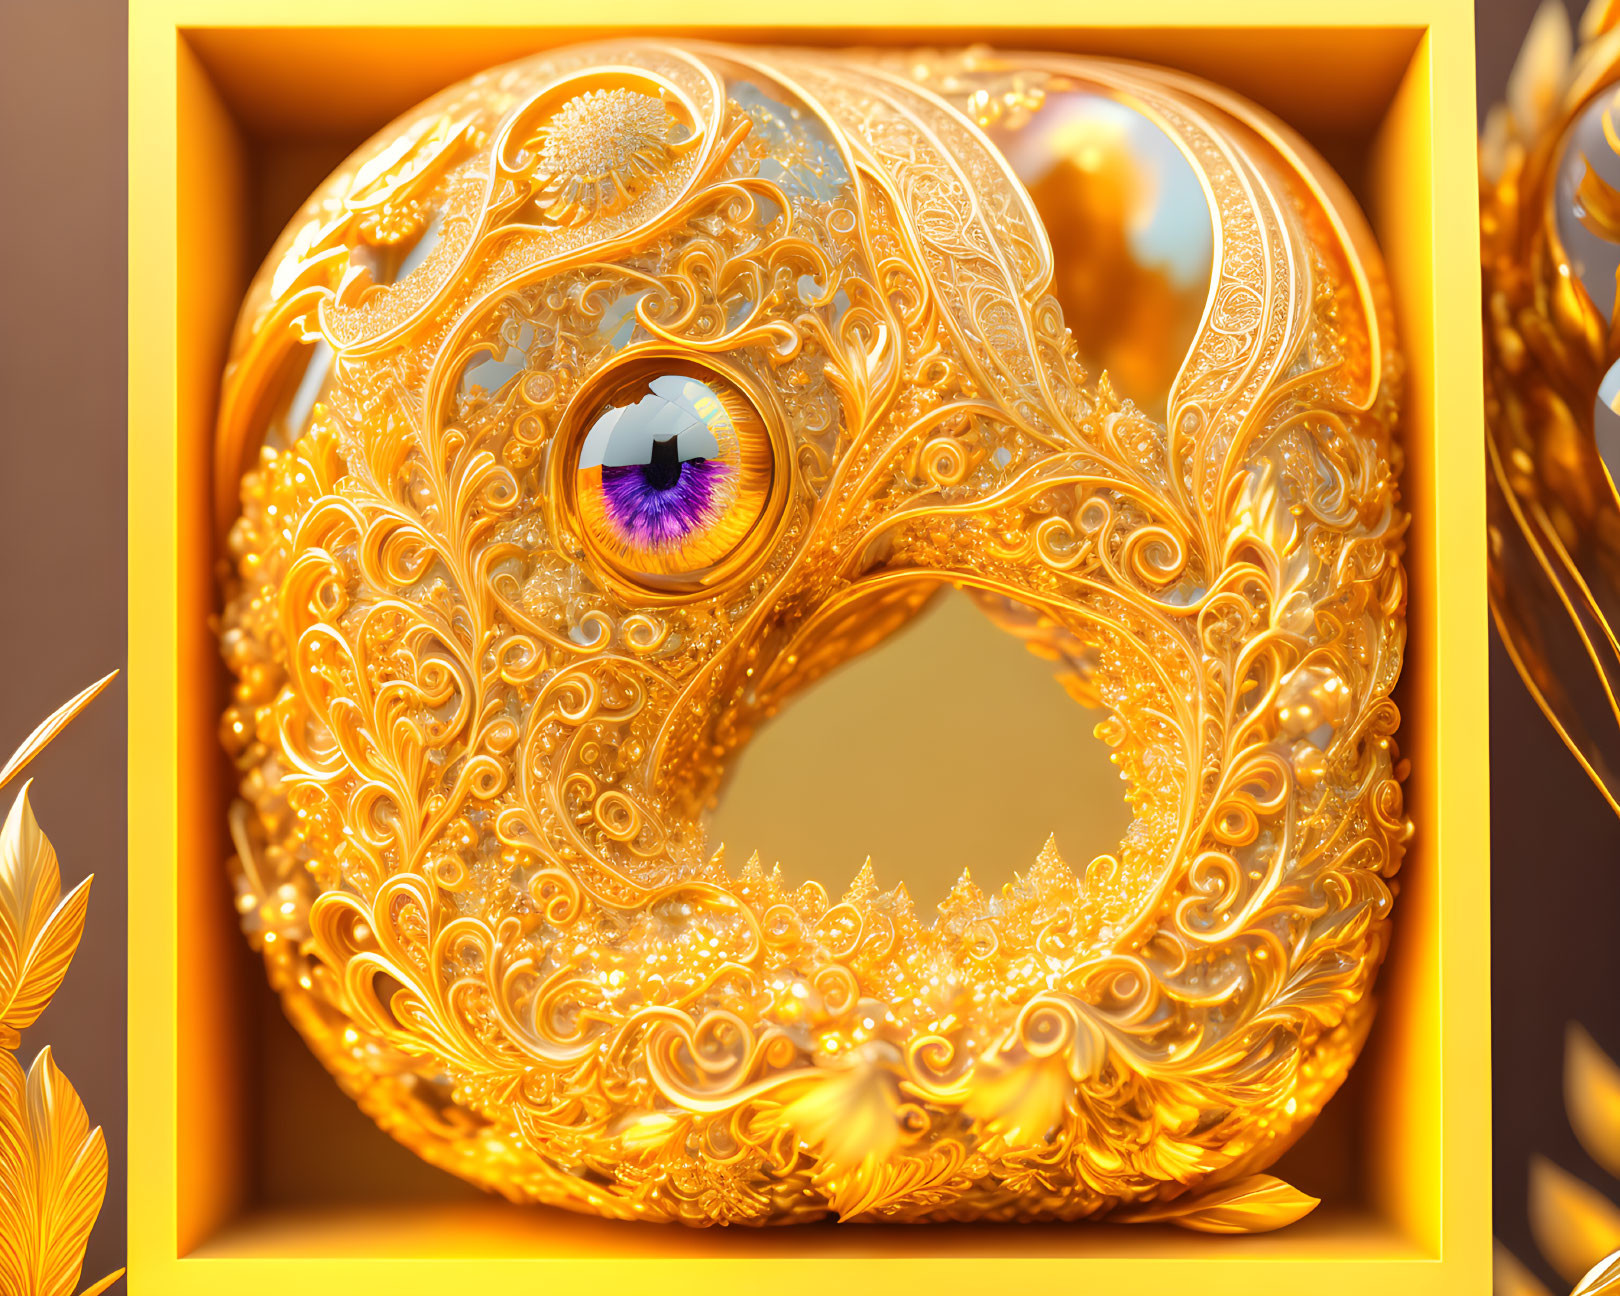 Intricate Golden Fractal Swirl with Reflective Sphere and Warm Background